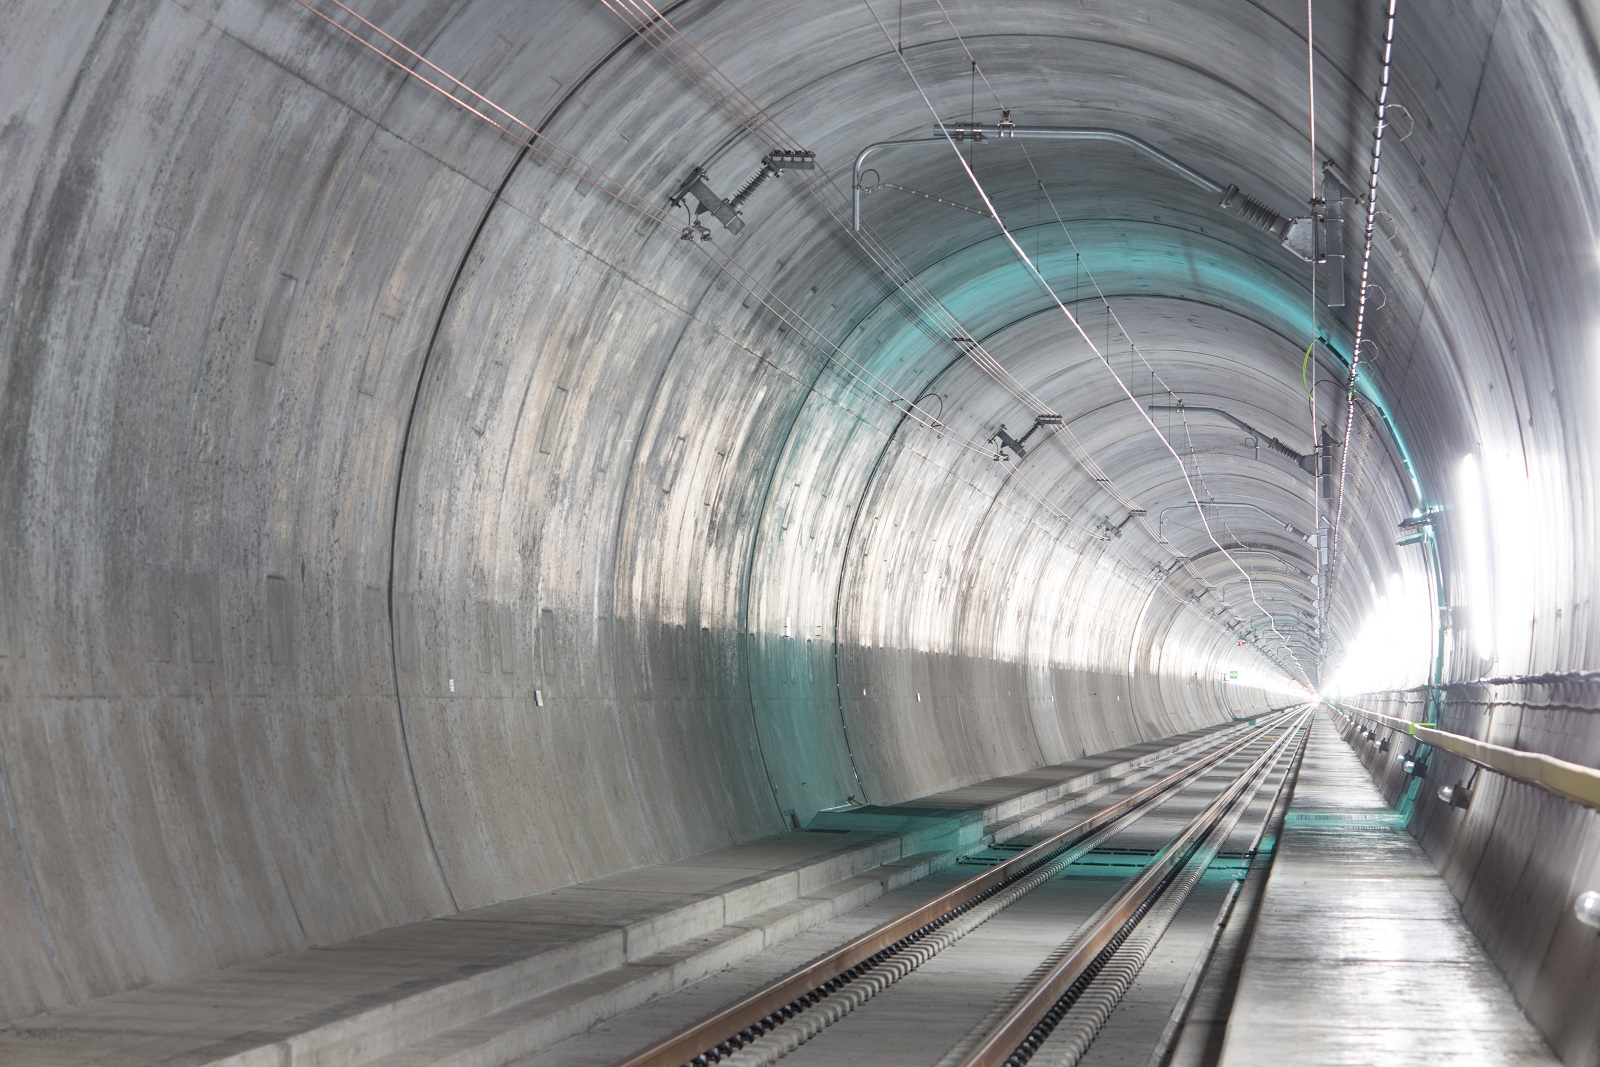 The new tunnel under the Gotthard